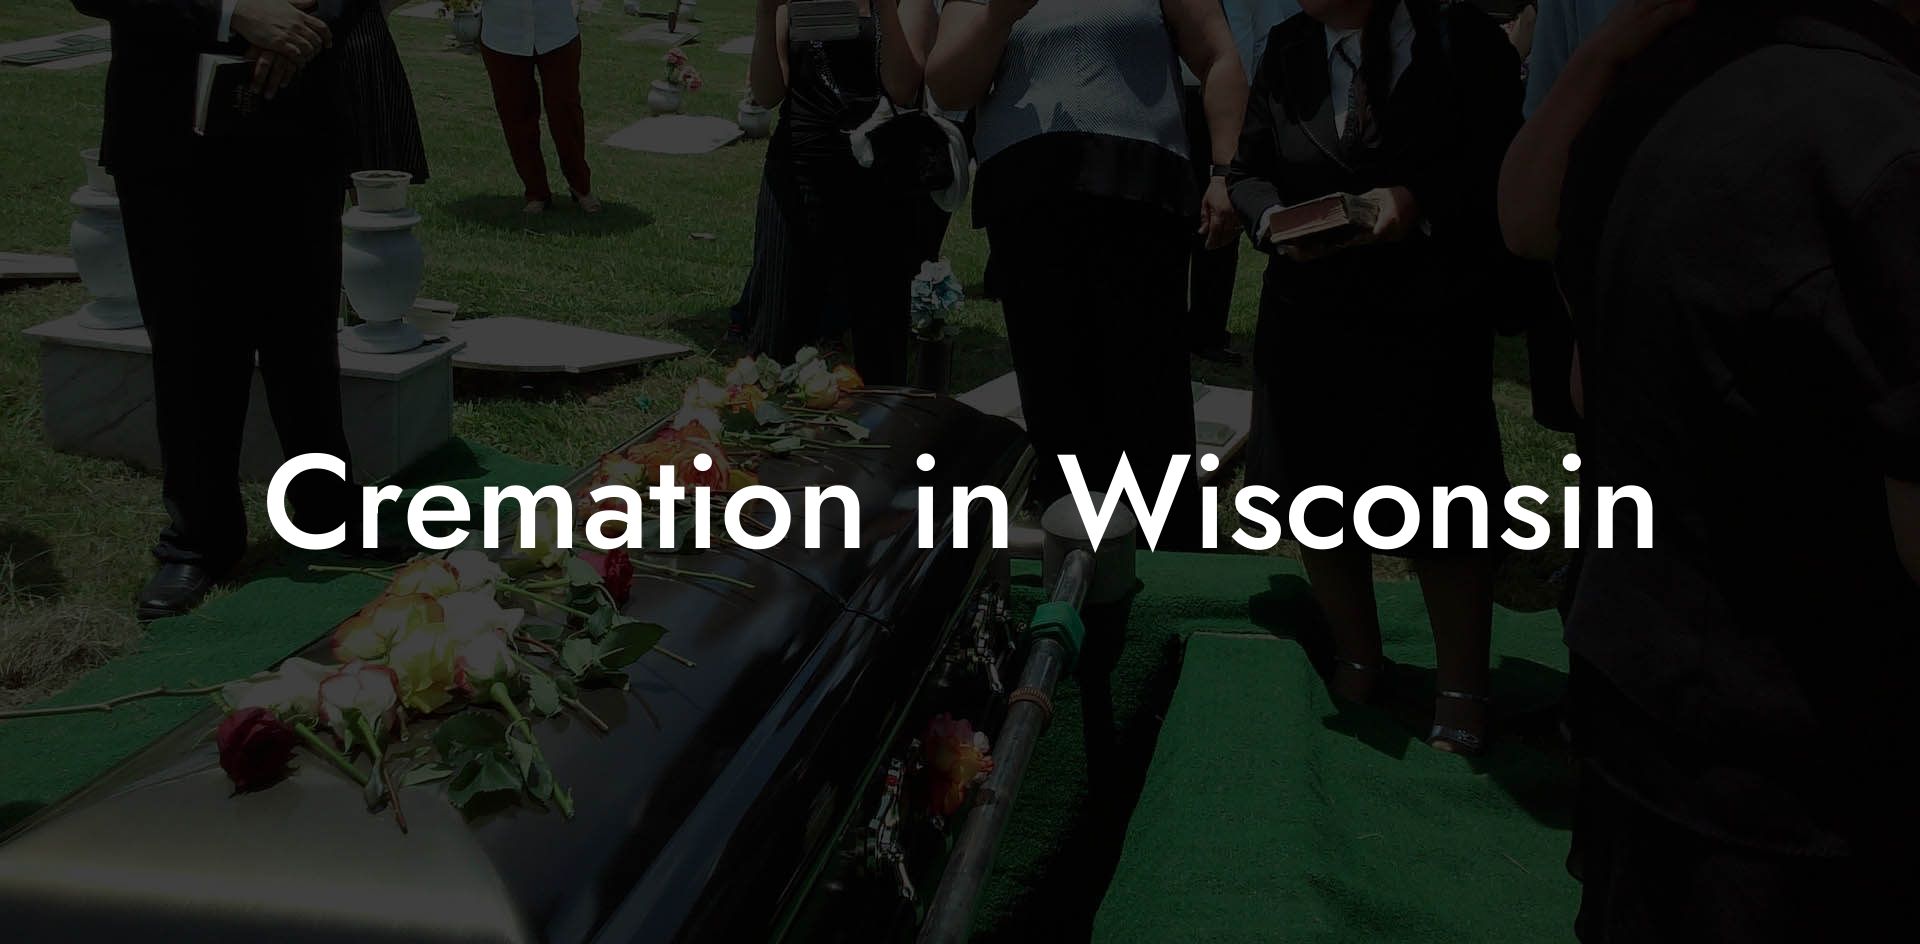 Cremation in Wisconsin